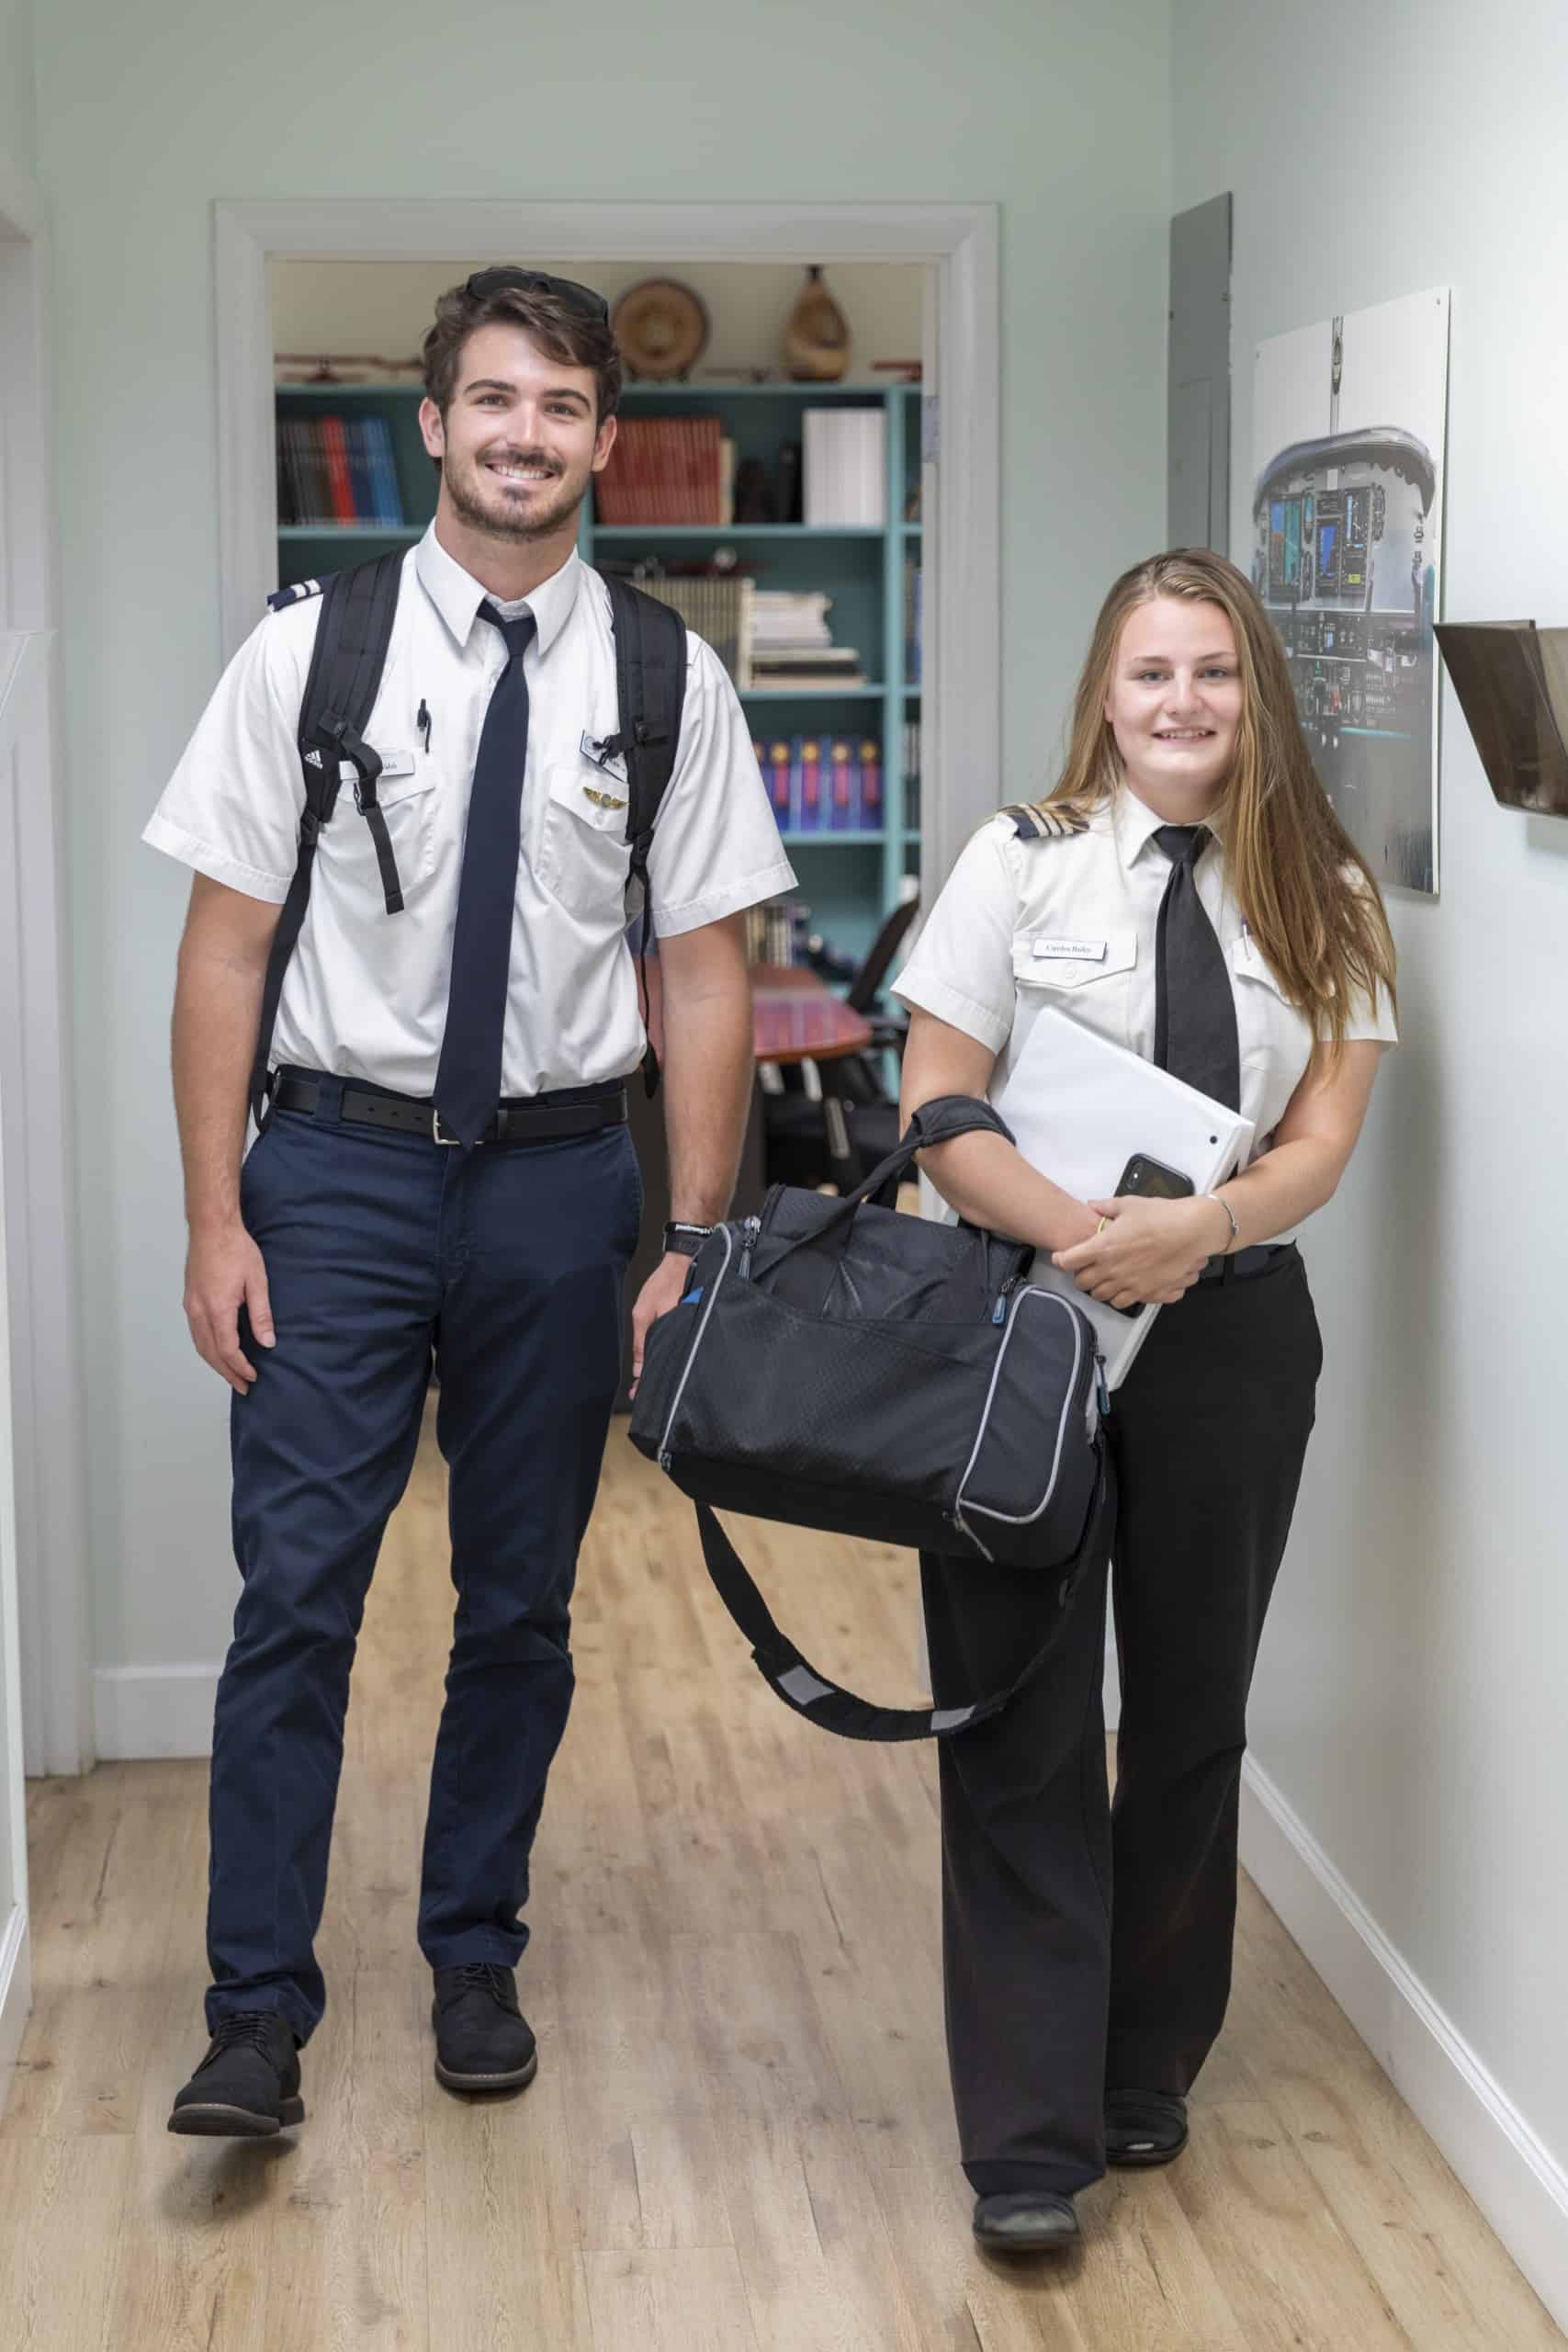 Two Paris Air flight students walking together and smiling